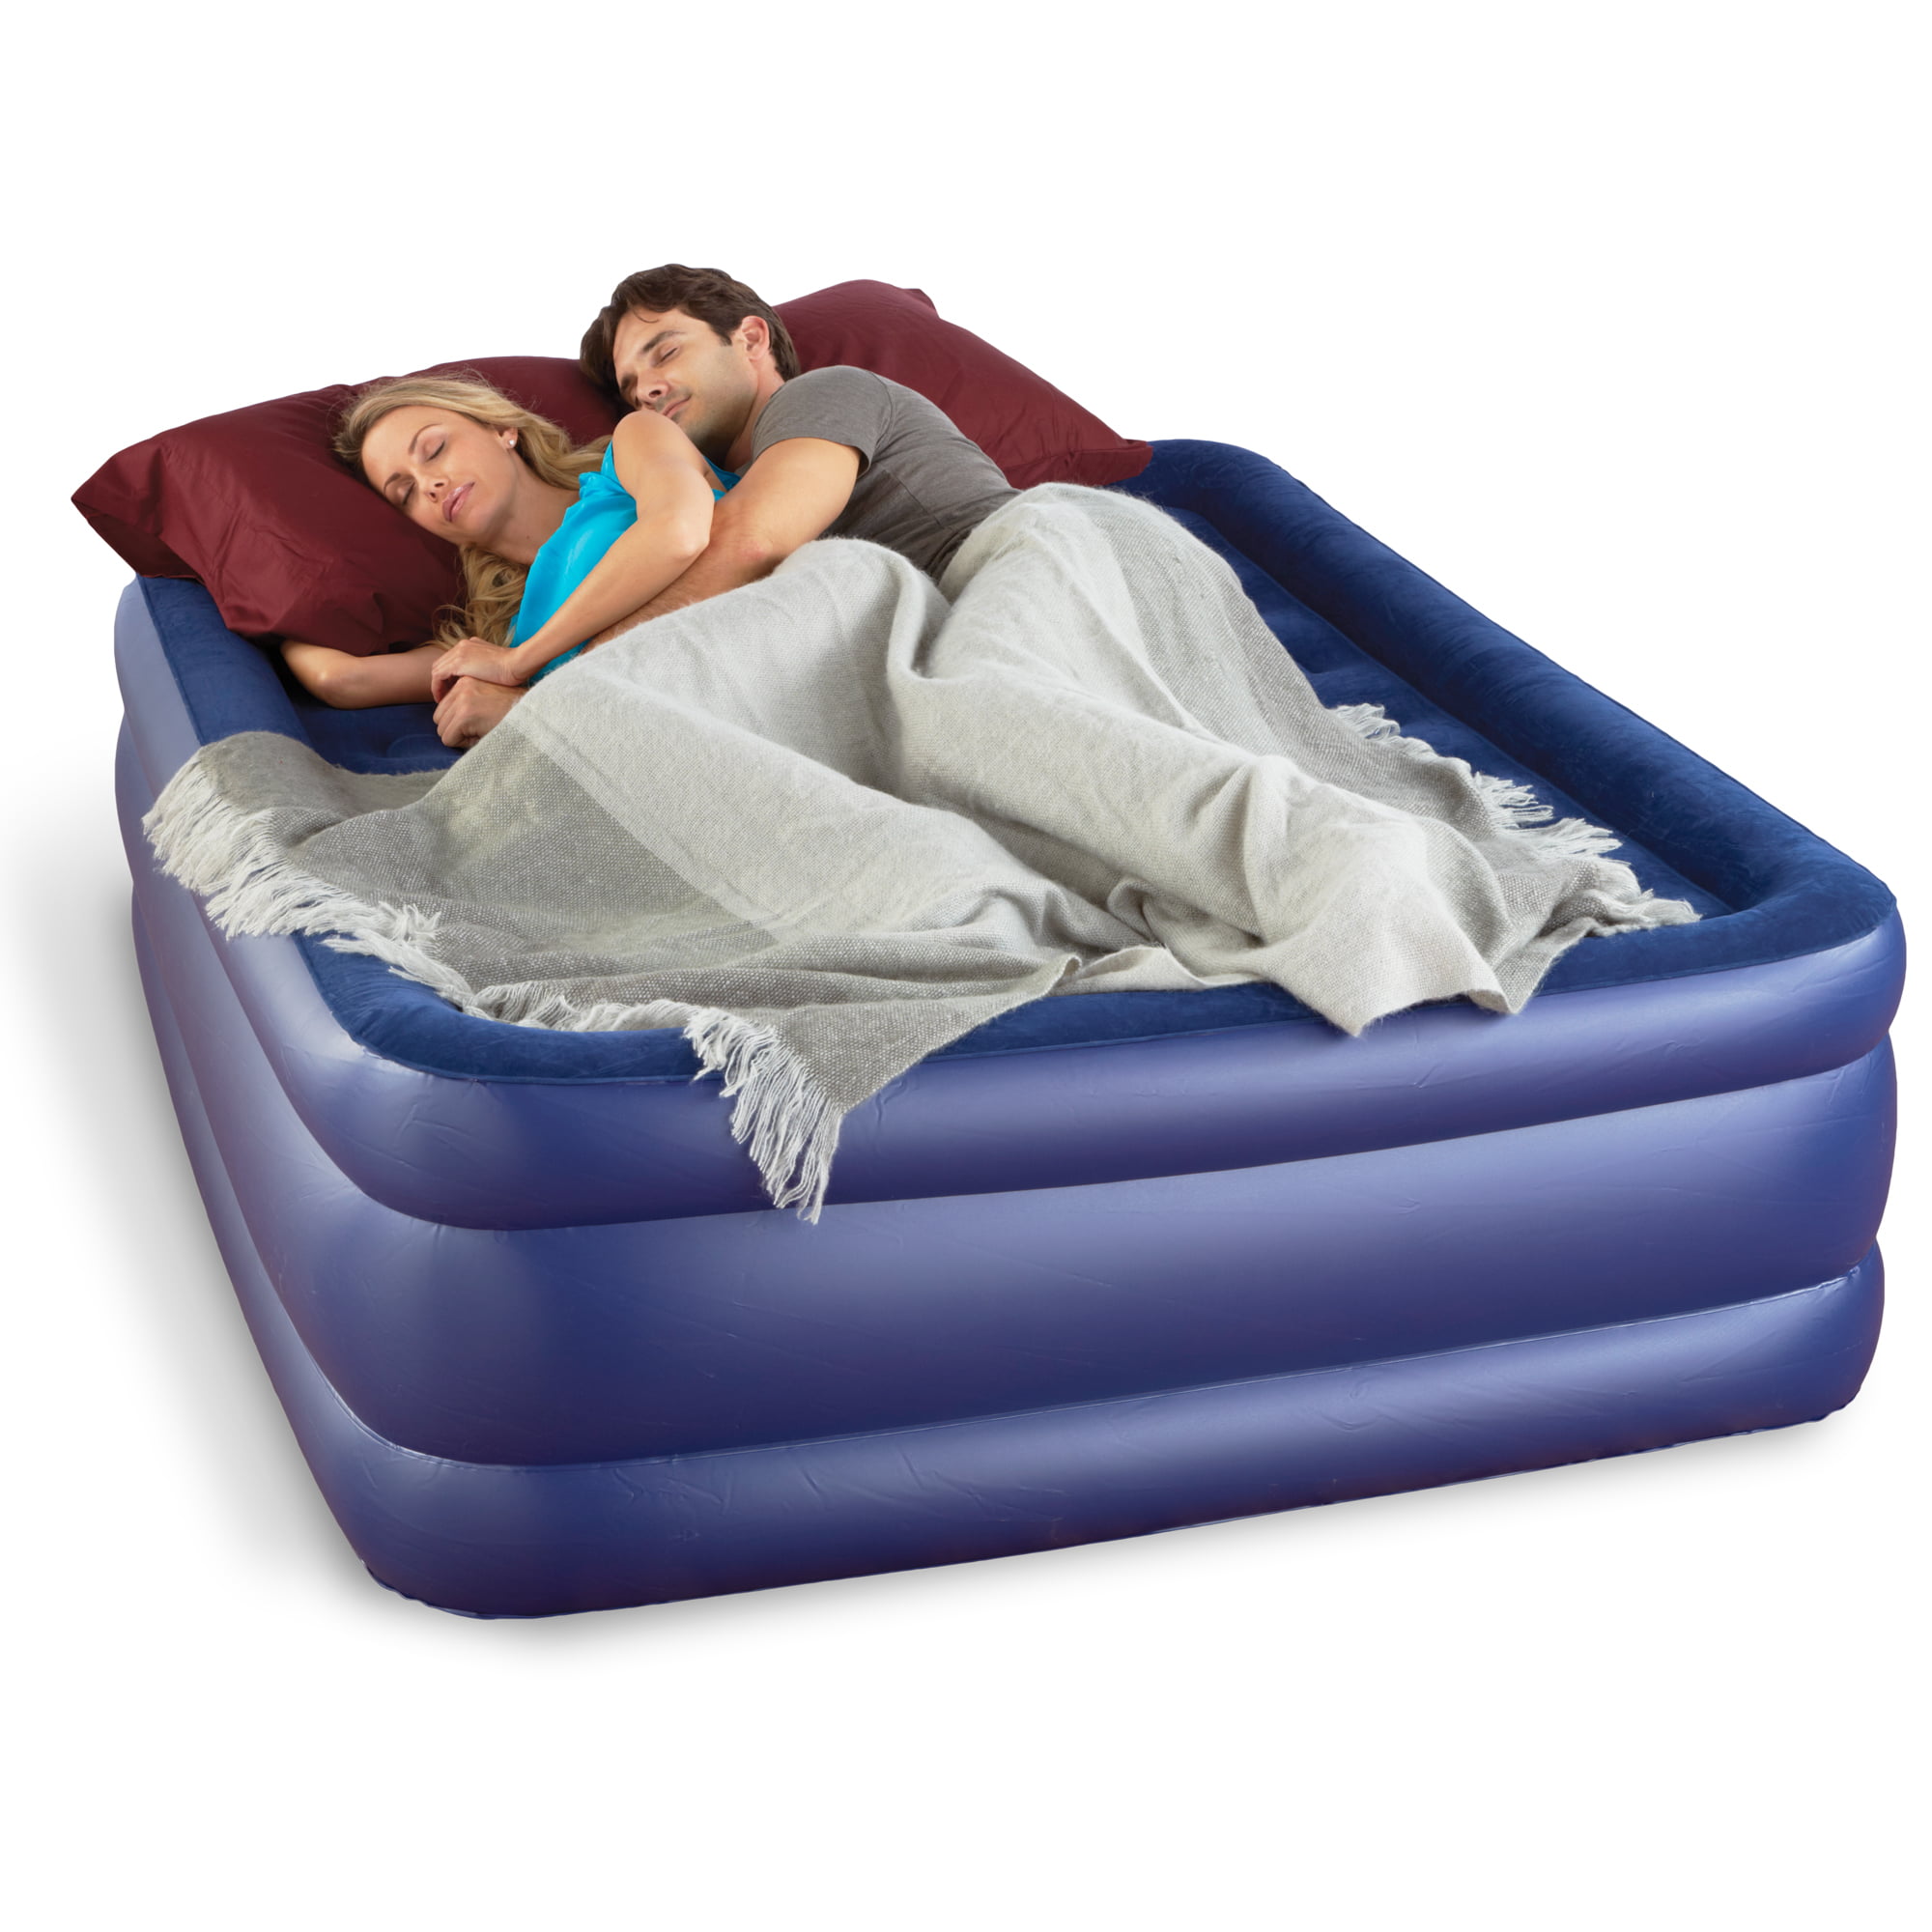 NEW AeroBed sleep tight inflatable beds for kids FREE SHIPPING safety airbed 